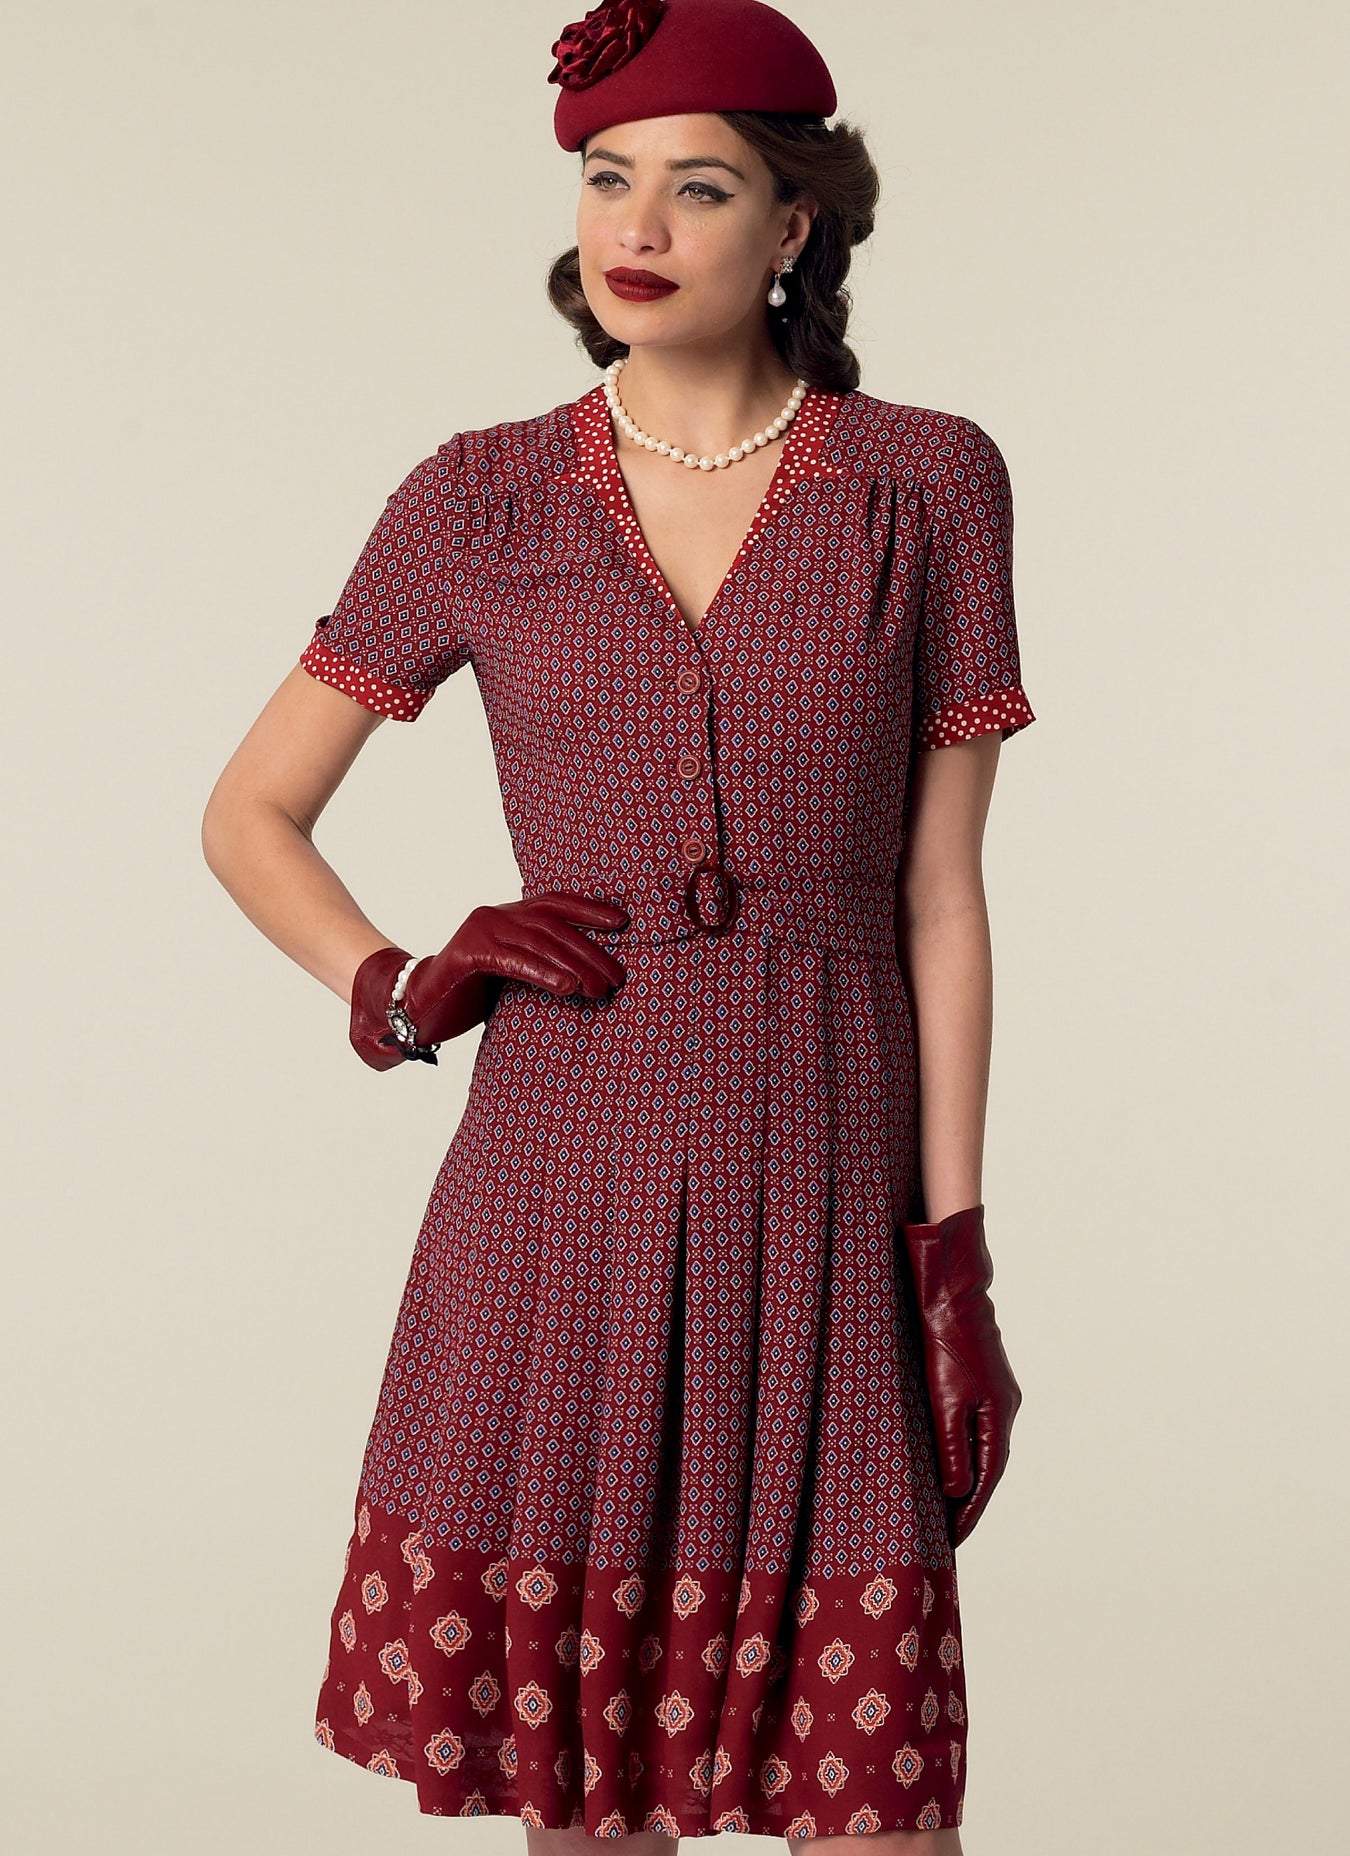 wide selection of sewing patterns vintage designs